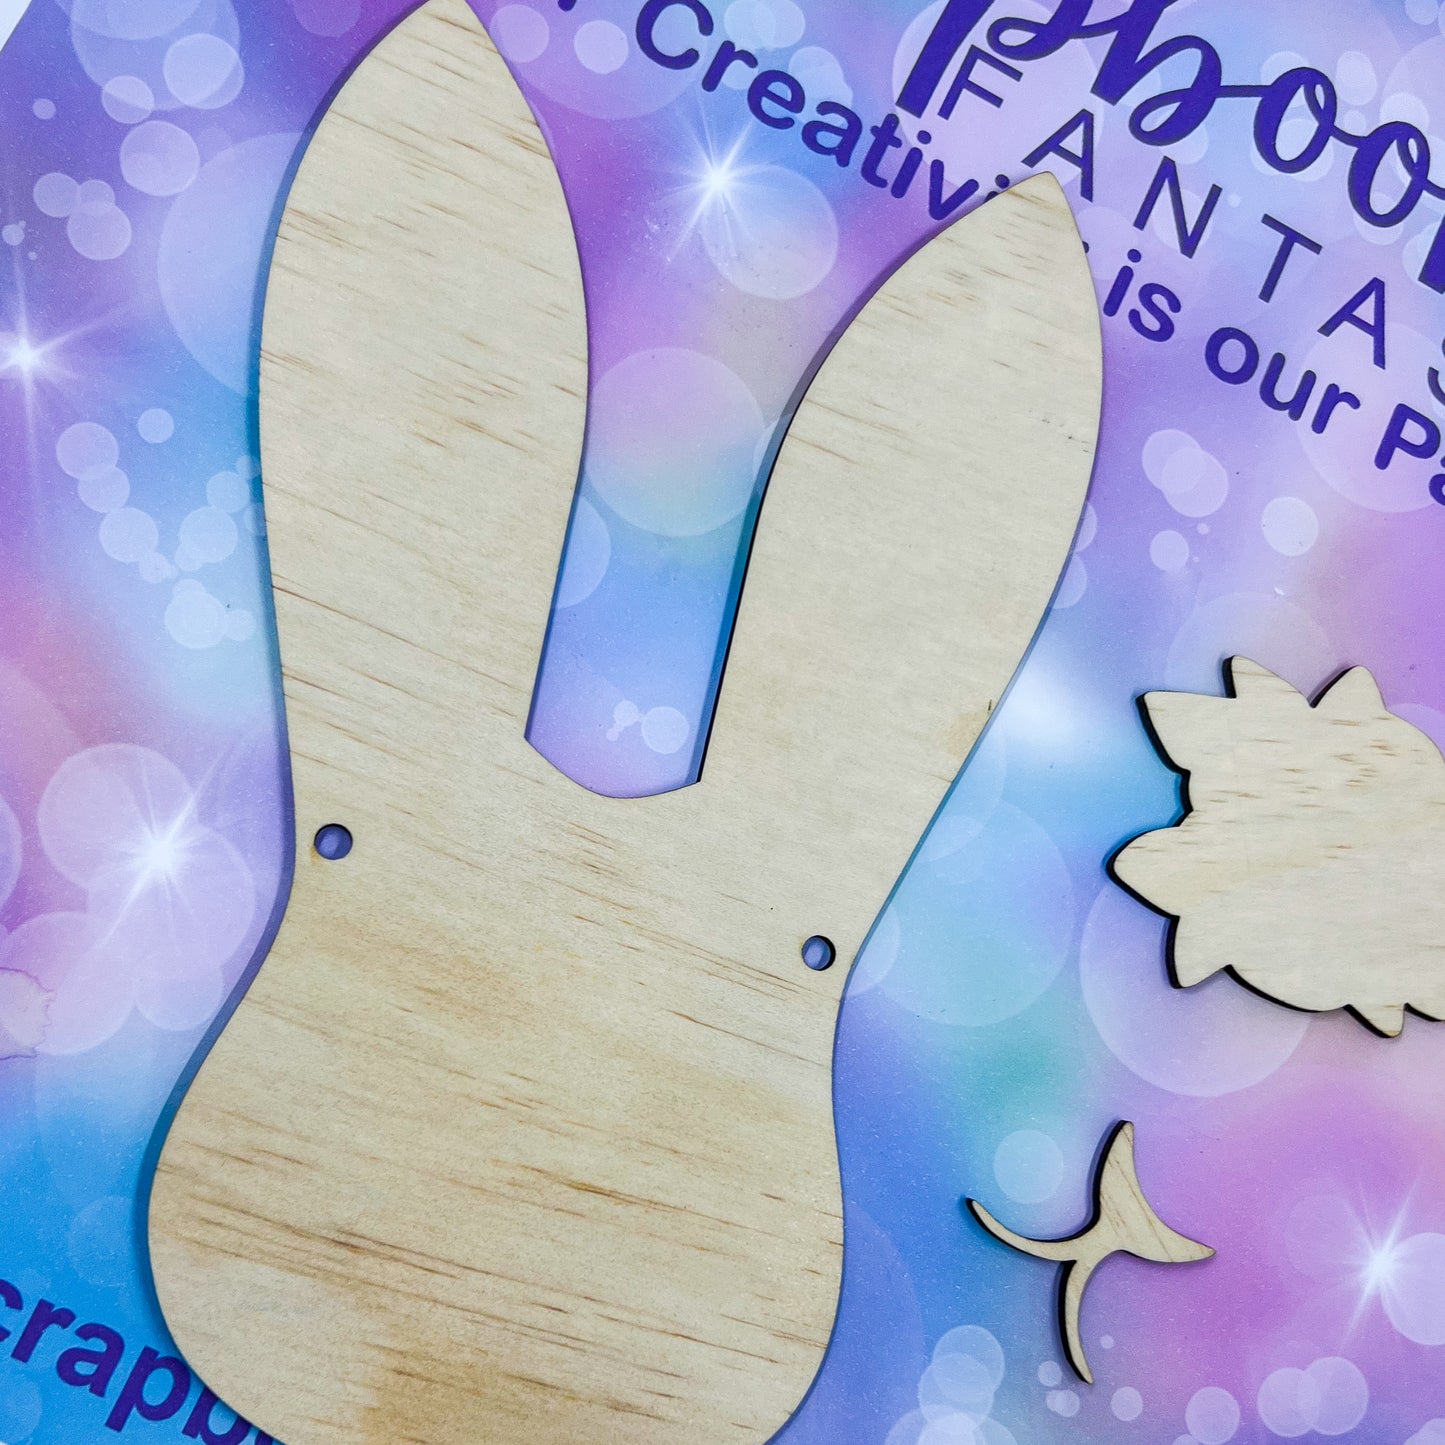 Ready-to-Colour Wooden Project Set - Rabbit (3 pieces) including holes for hanging - 4.75"x8.25" (12cmx21cm) 19393